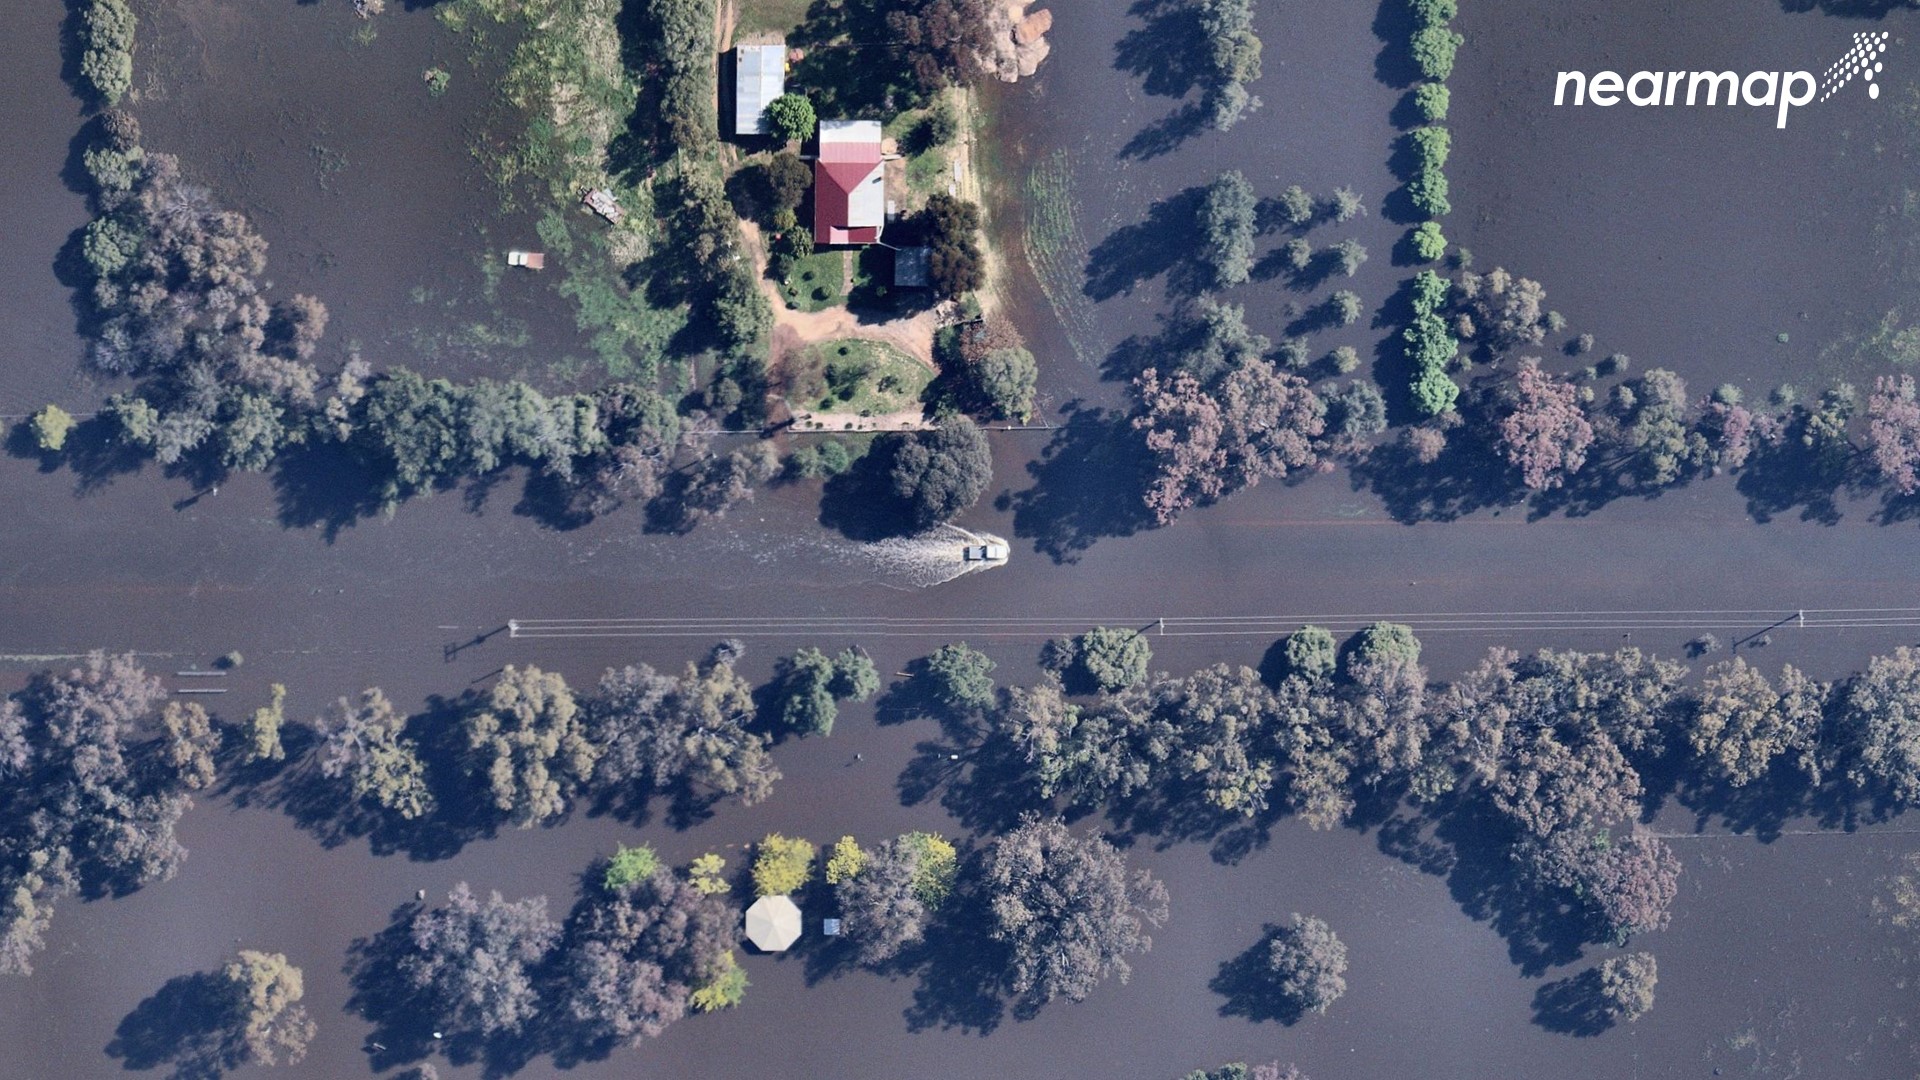 Flooding inundates Forbes as seen from the sky.